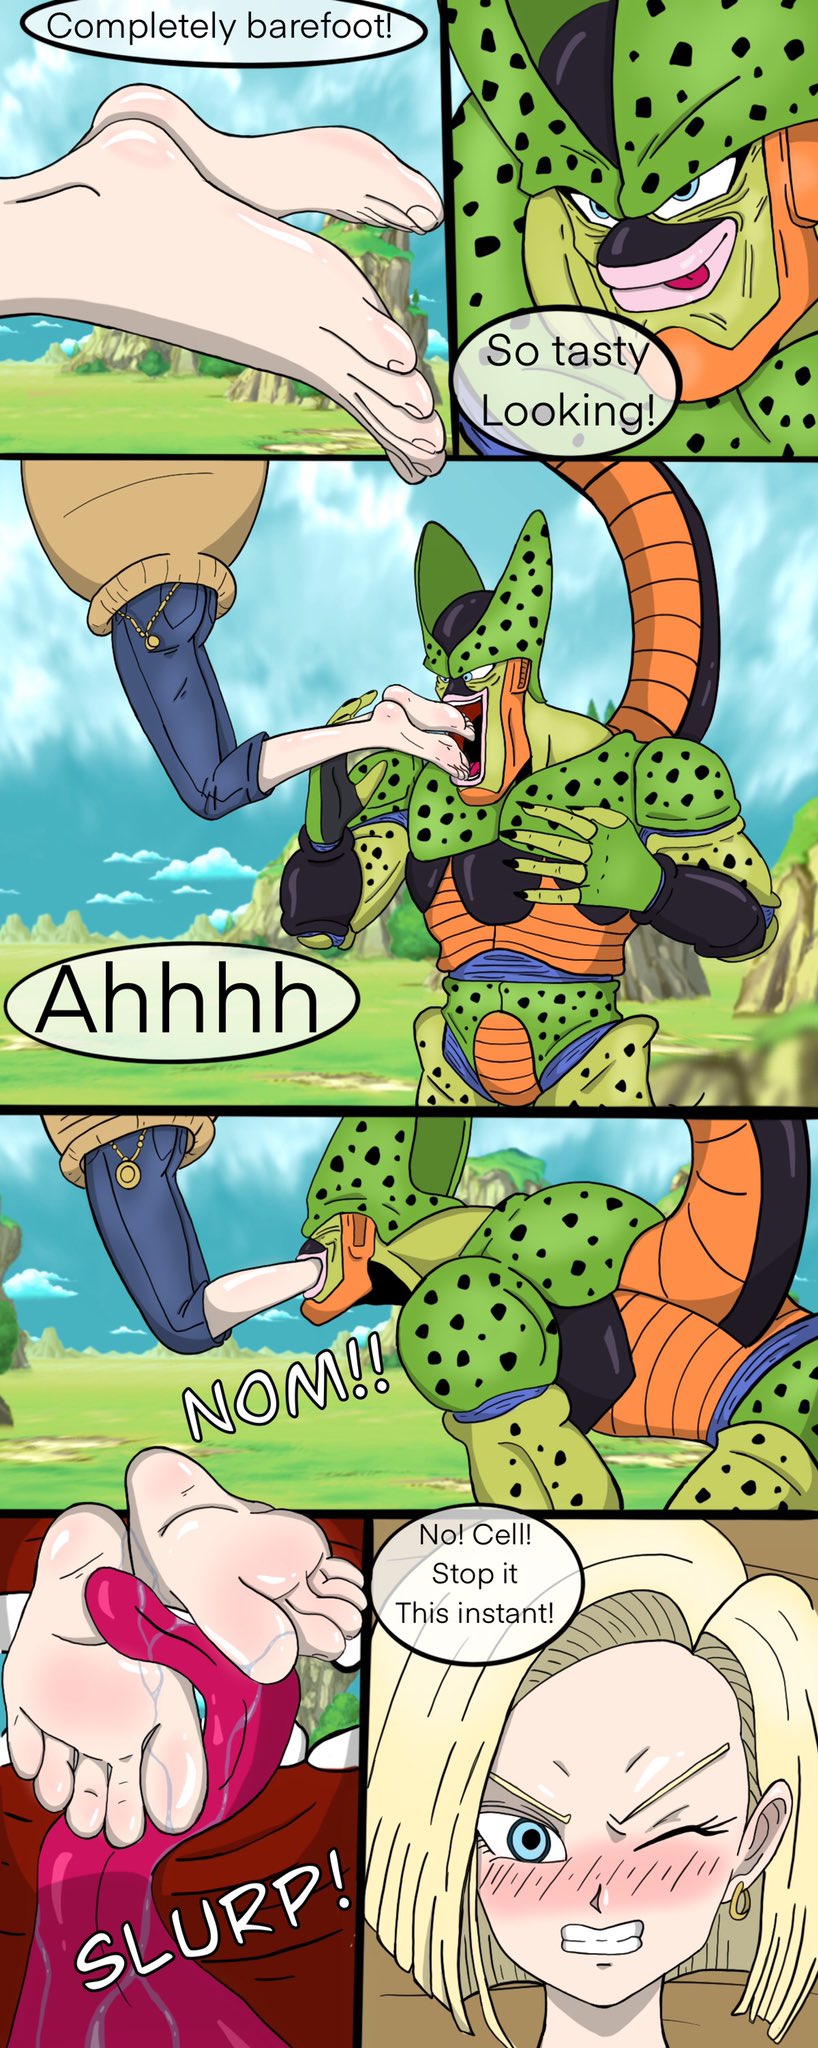 NashPotato 🔞 on X: Here we are everybody page 8 of the Vorefoot comic,  Android 18 is completely barefoot and Cell begins nomming on both her feet,  18 is angry yet so